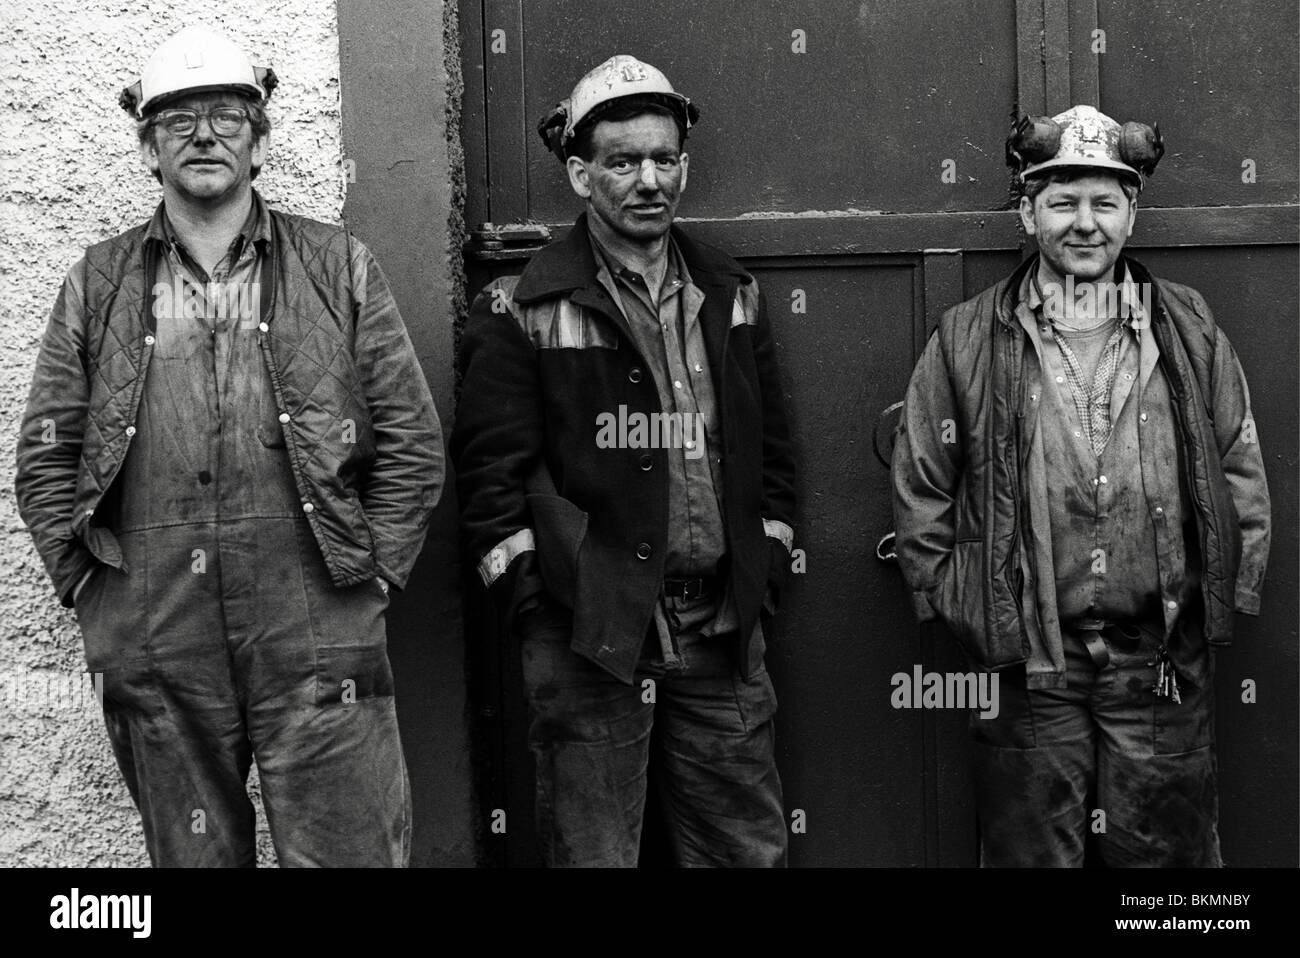 Coal miners on last day of work at Deep Navigation Colliery Treharris Mid Glamorgan South Wales Valleys UK Stock Photo